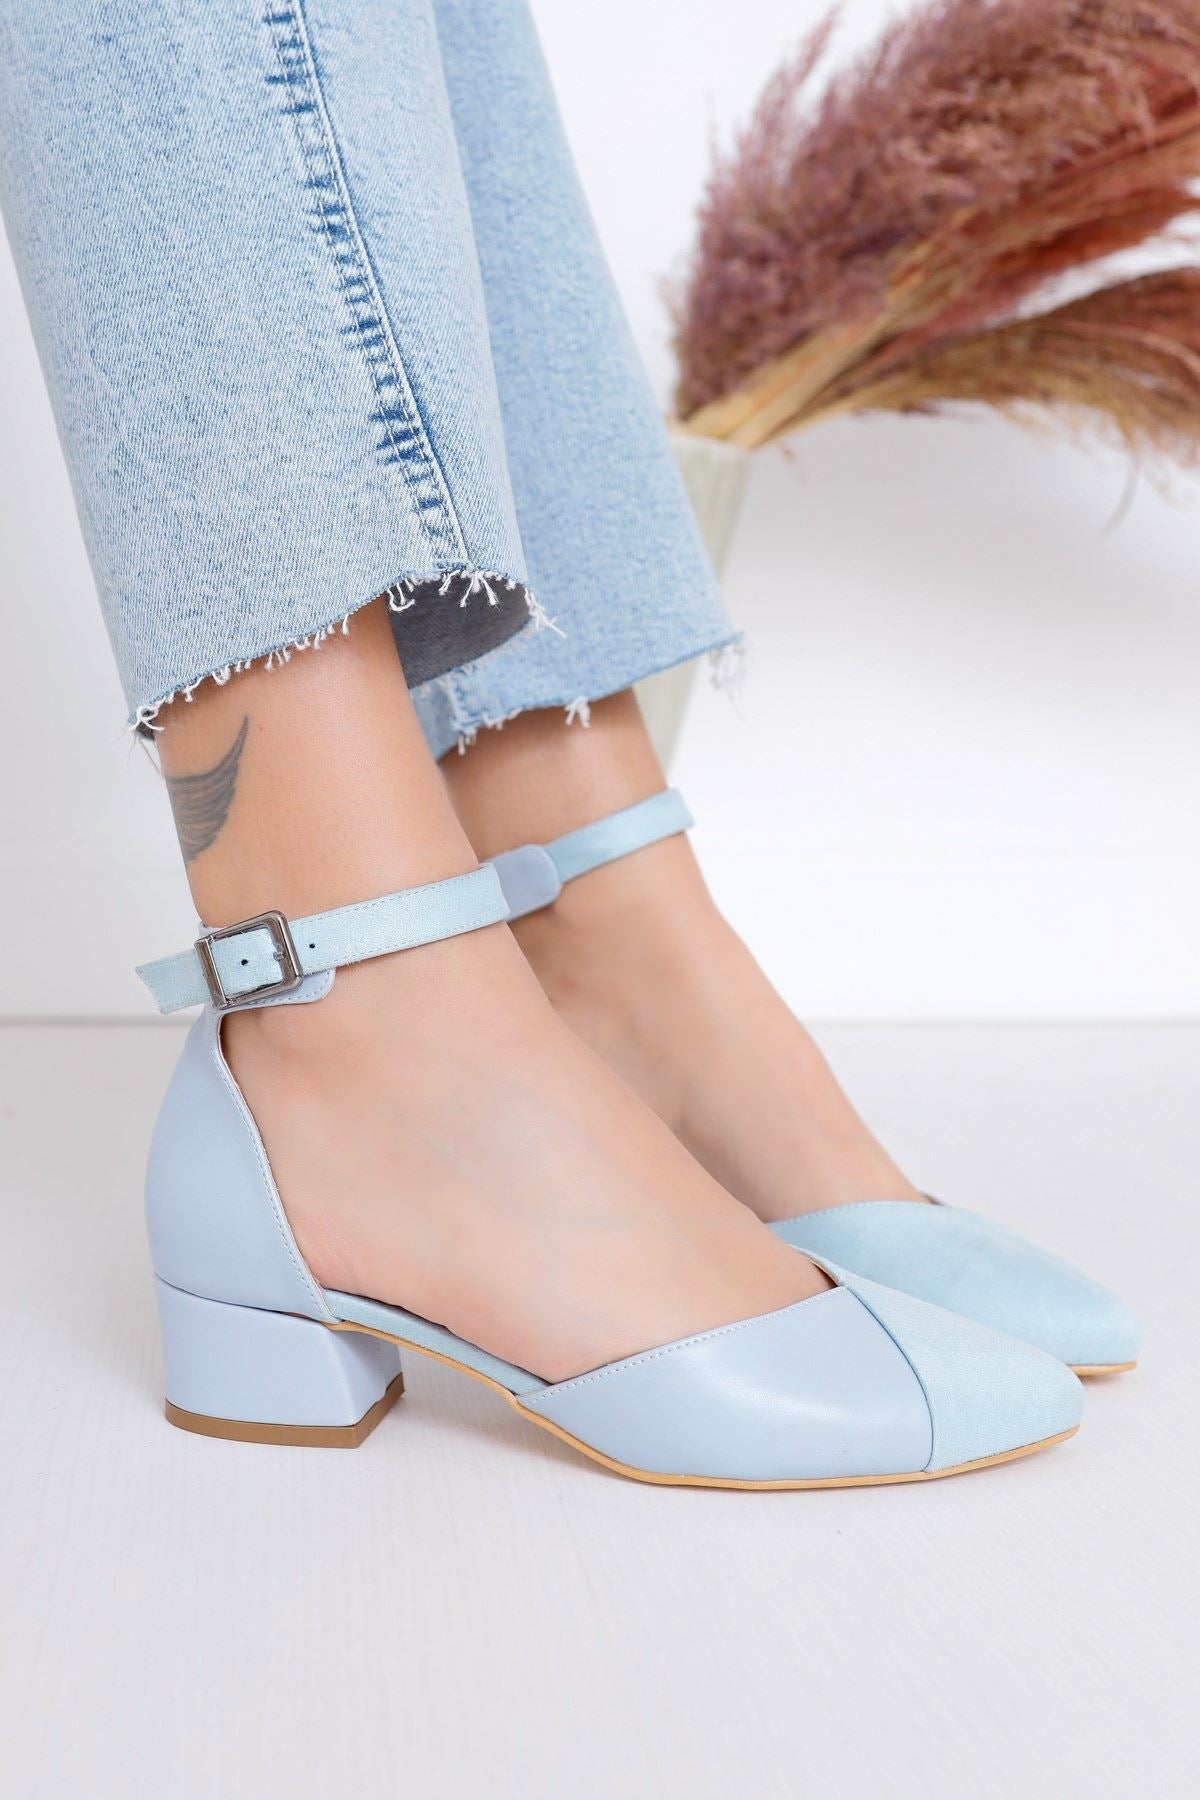 Women's Holly Heels Baby Blue Skin-Suede Shoes - STREETMODE ™